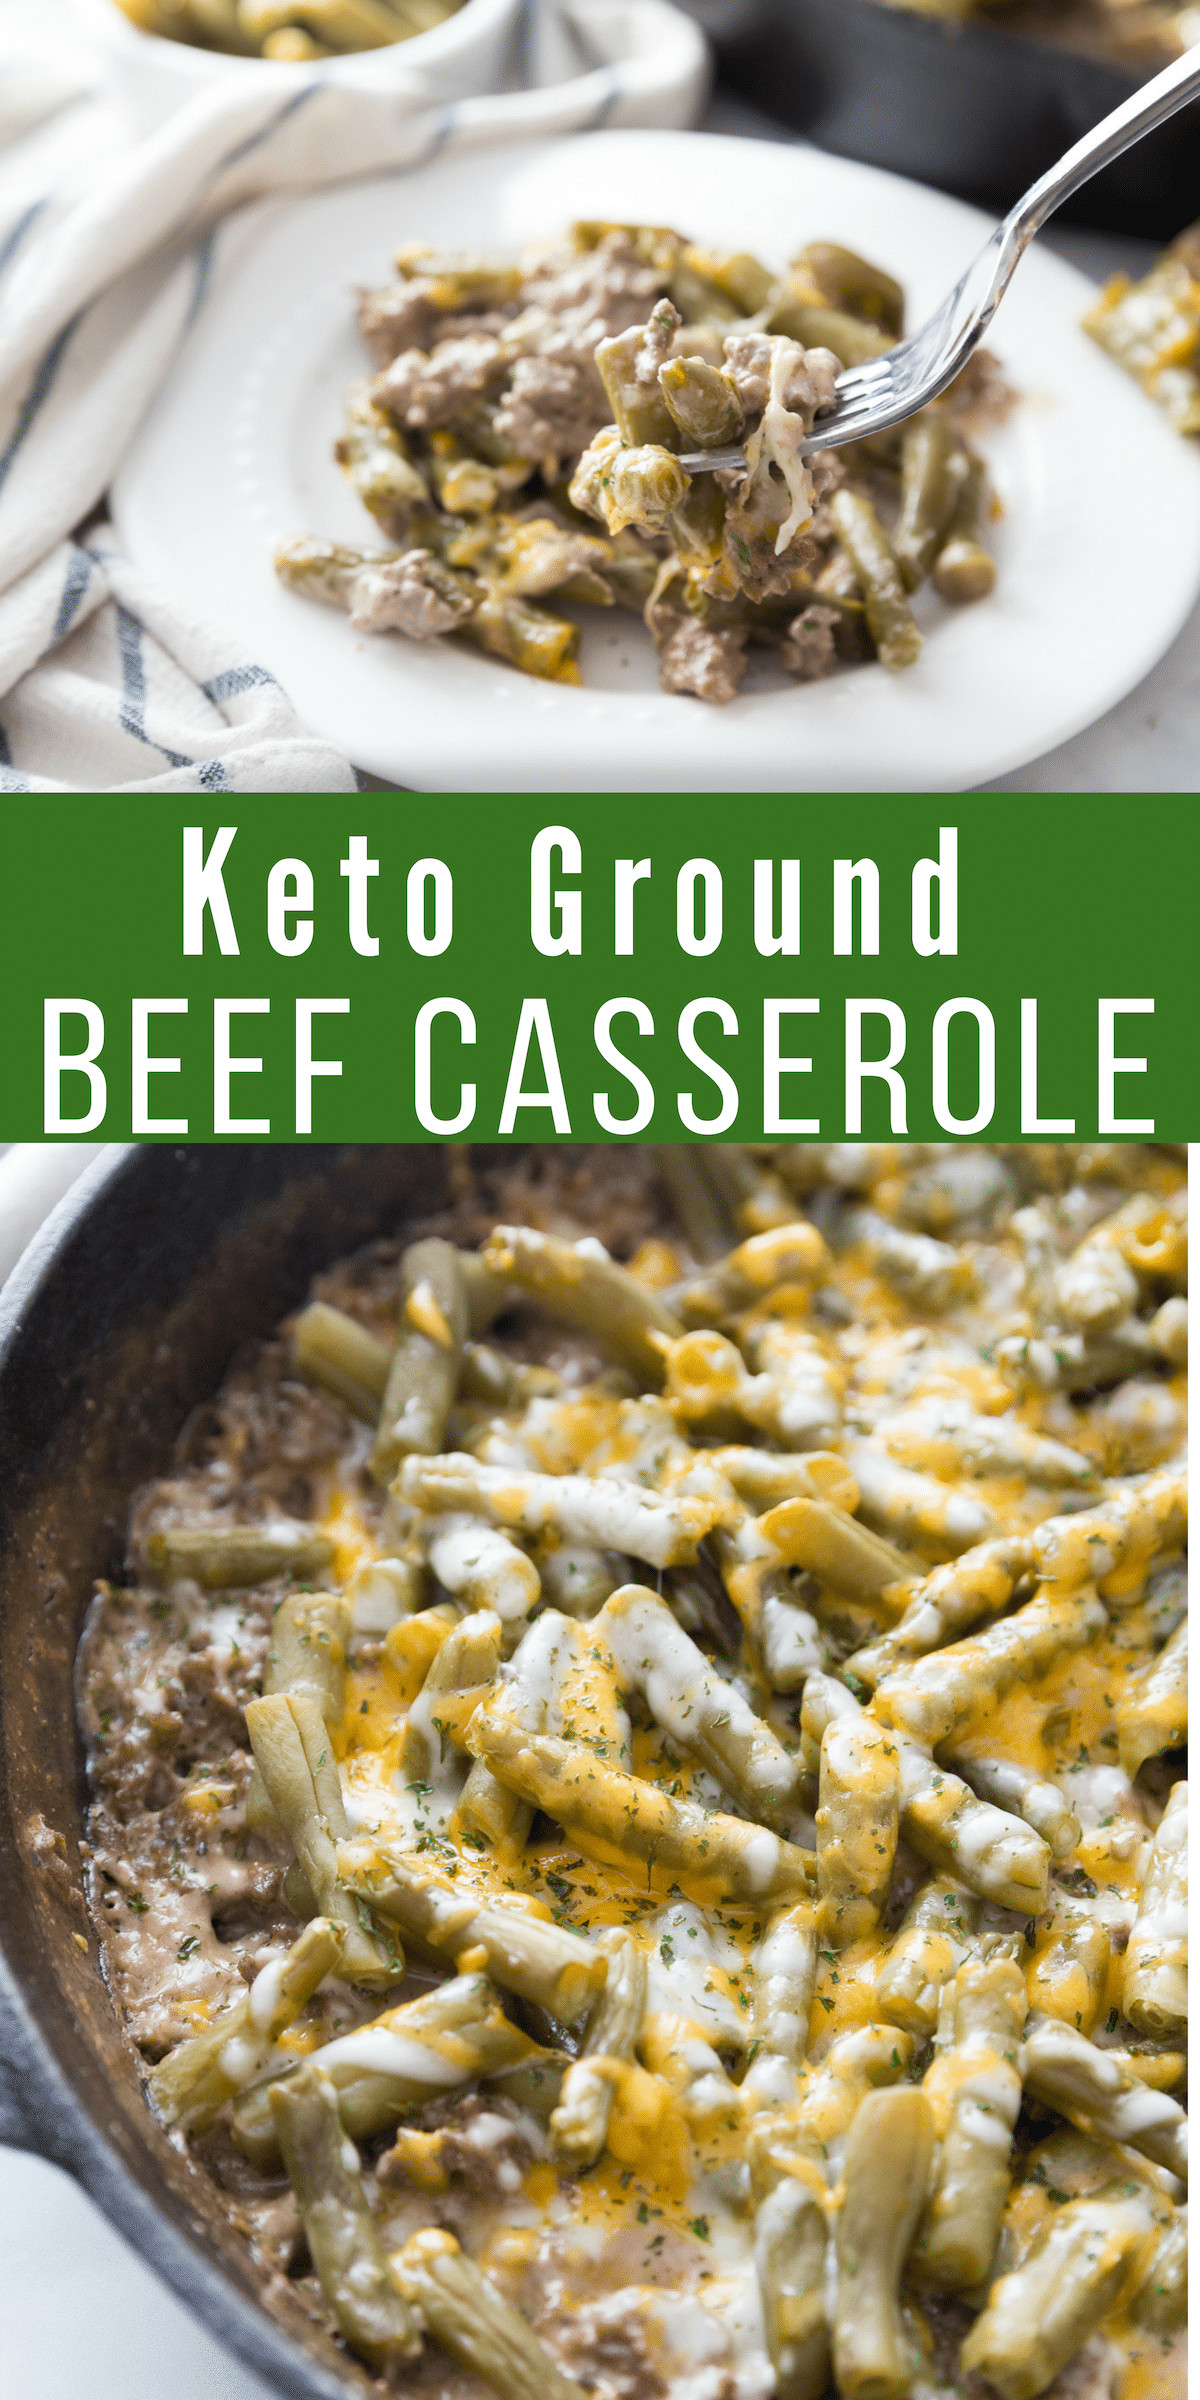 Keto Dinner Ideas With Ground Beef
 Keto Ground Beef Casserole Perfect fort Dish